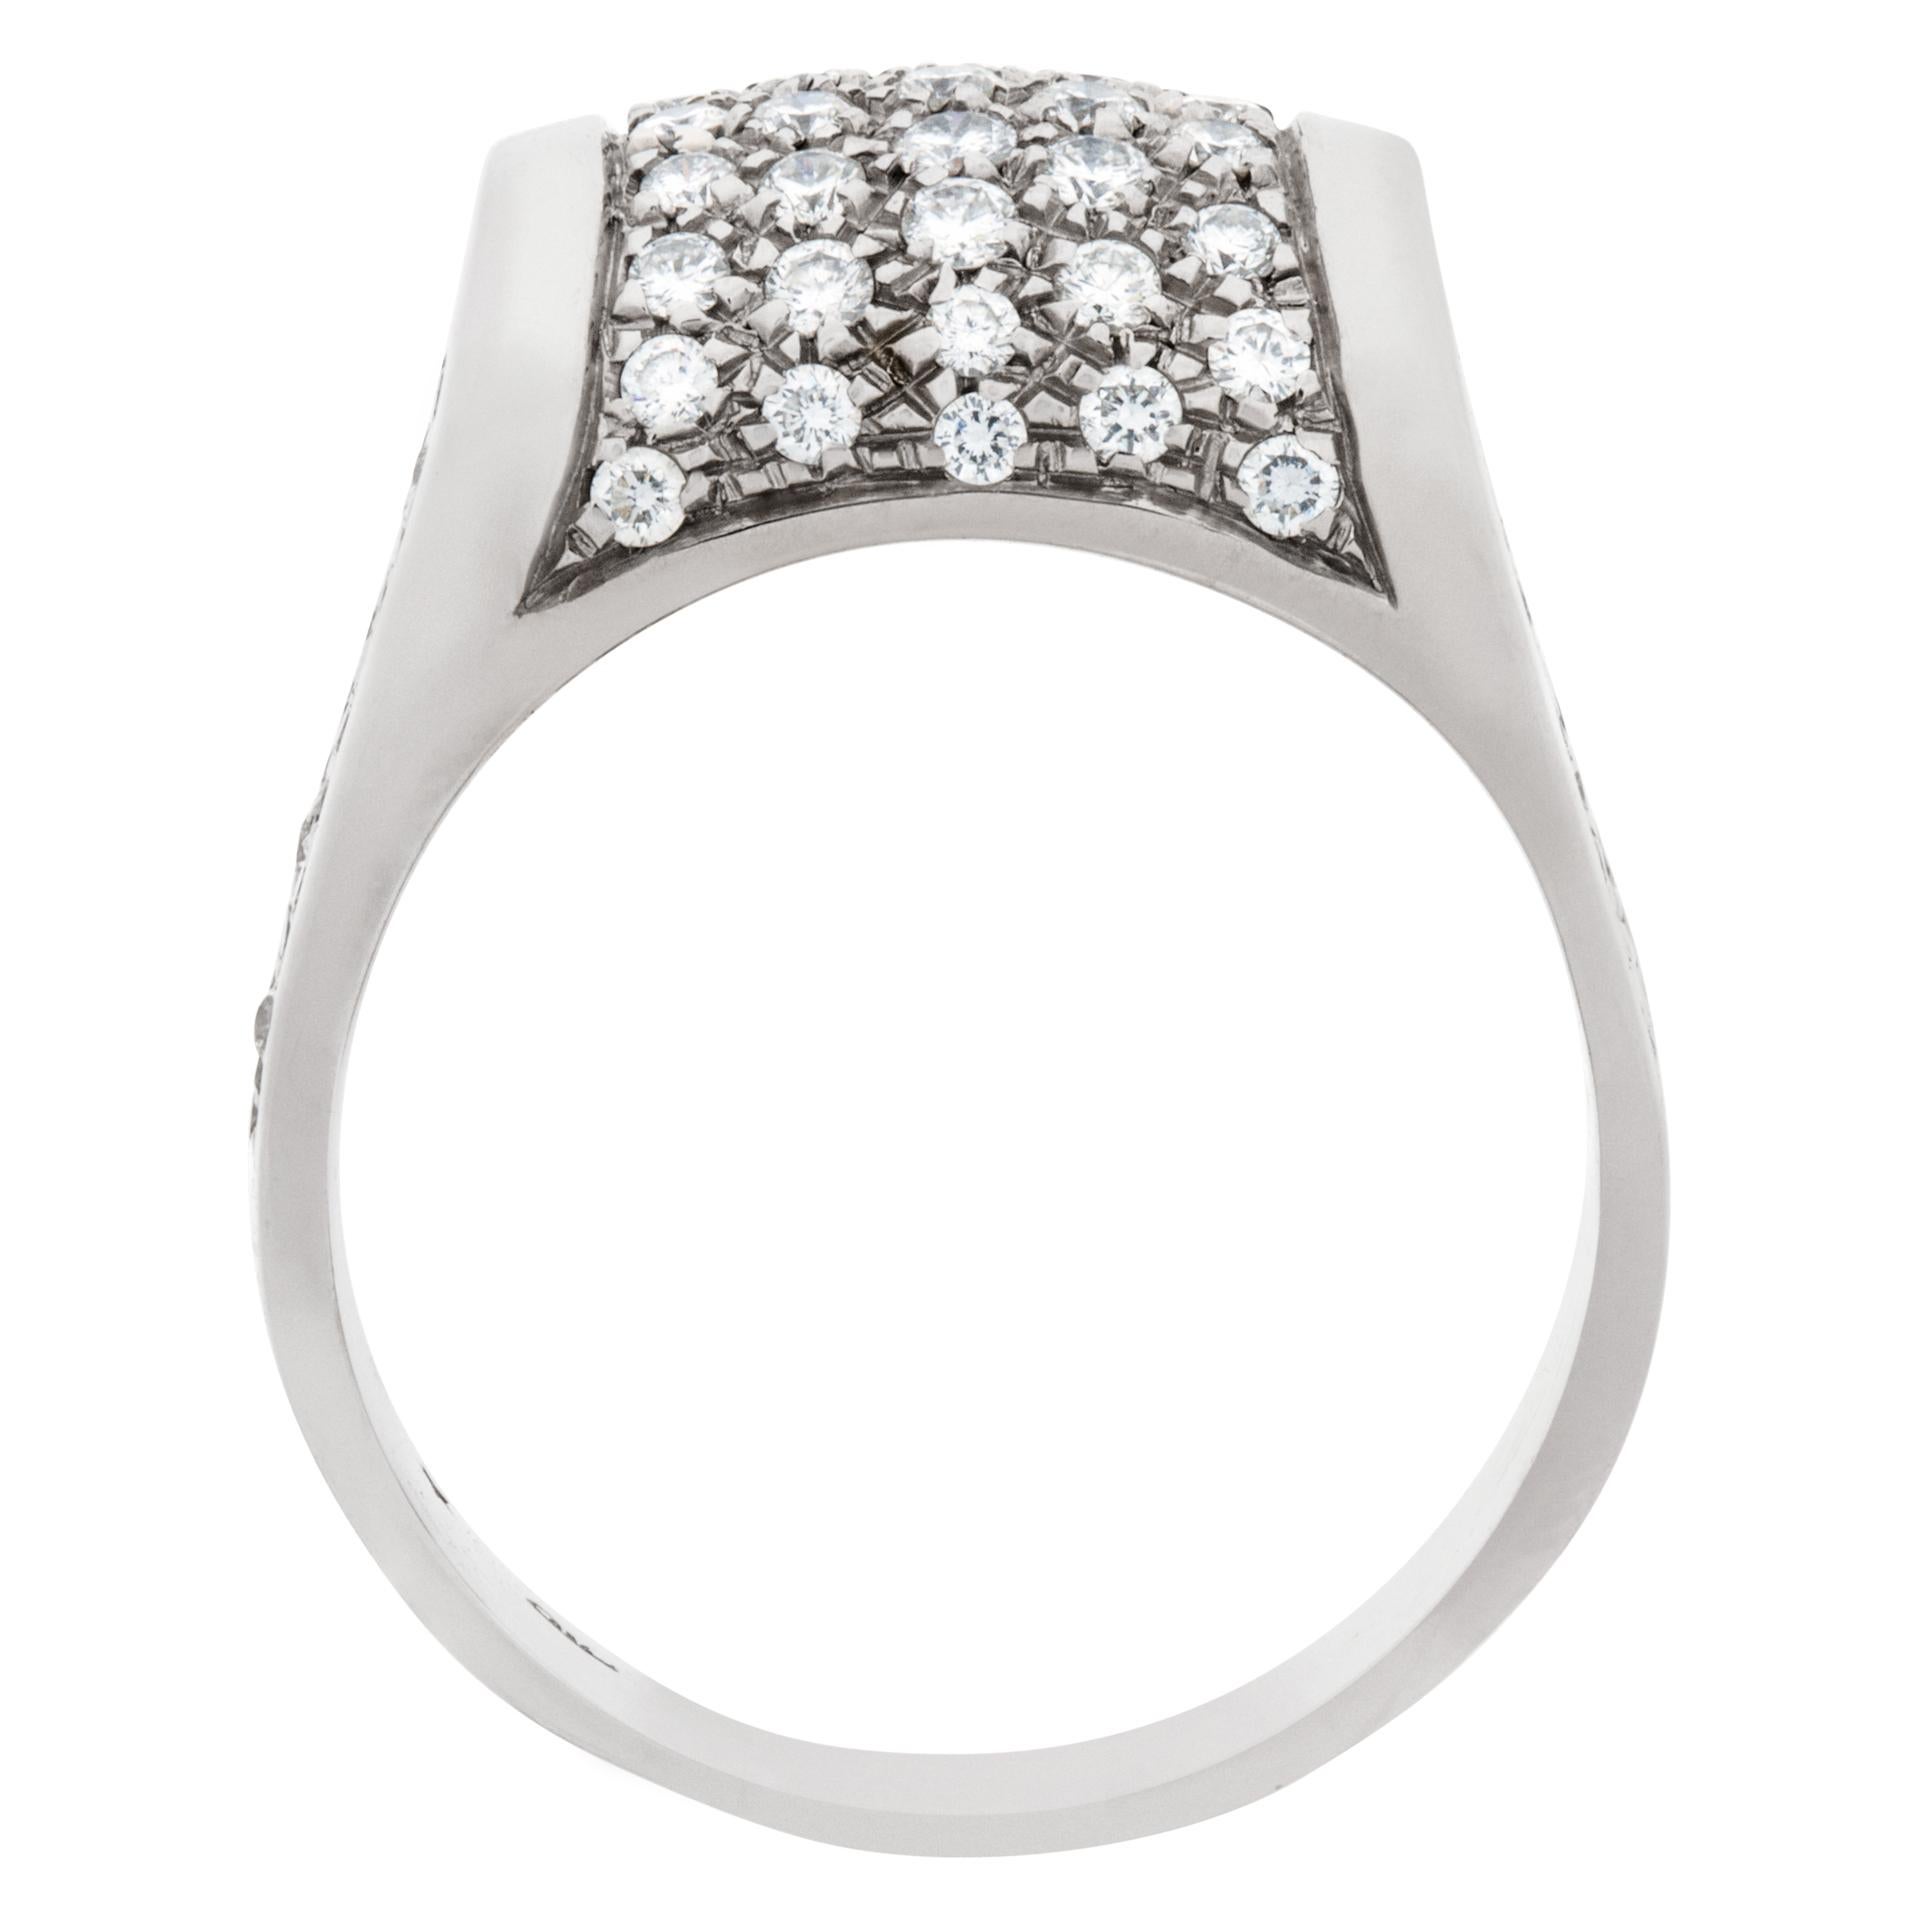 Pave Diamond Ring in 18k White Gold In Excellent Condition For Sale In Surfside, FL